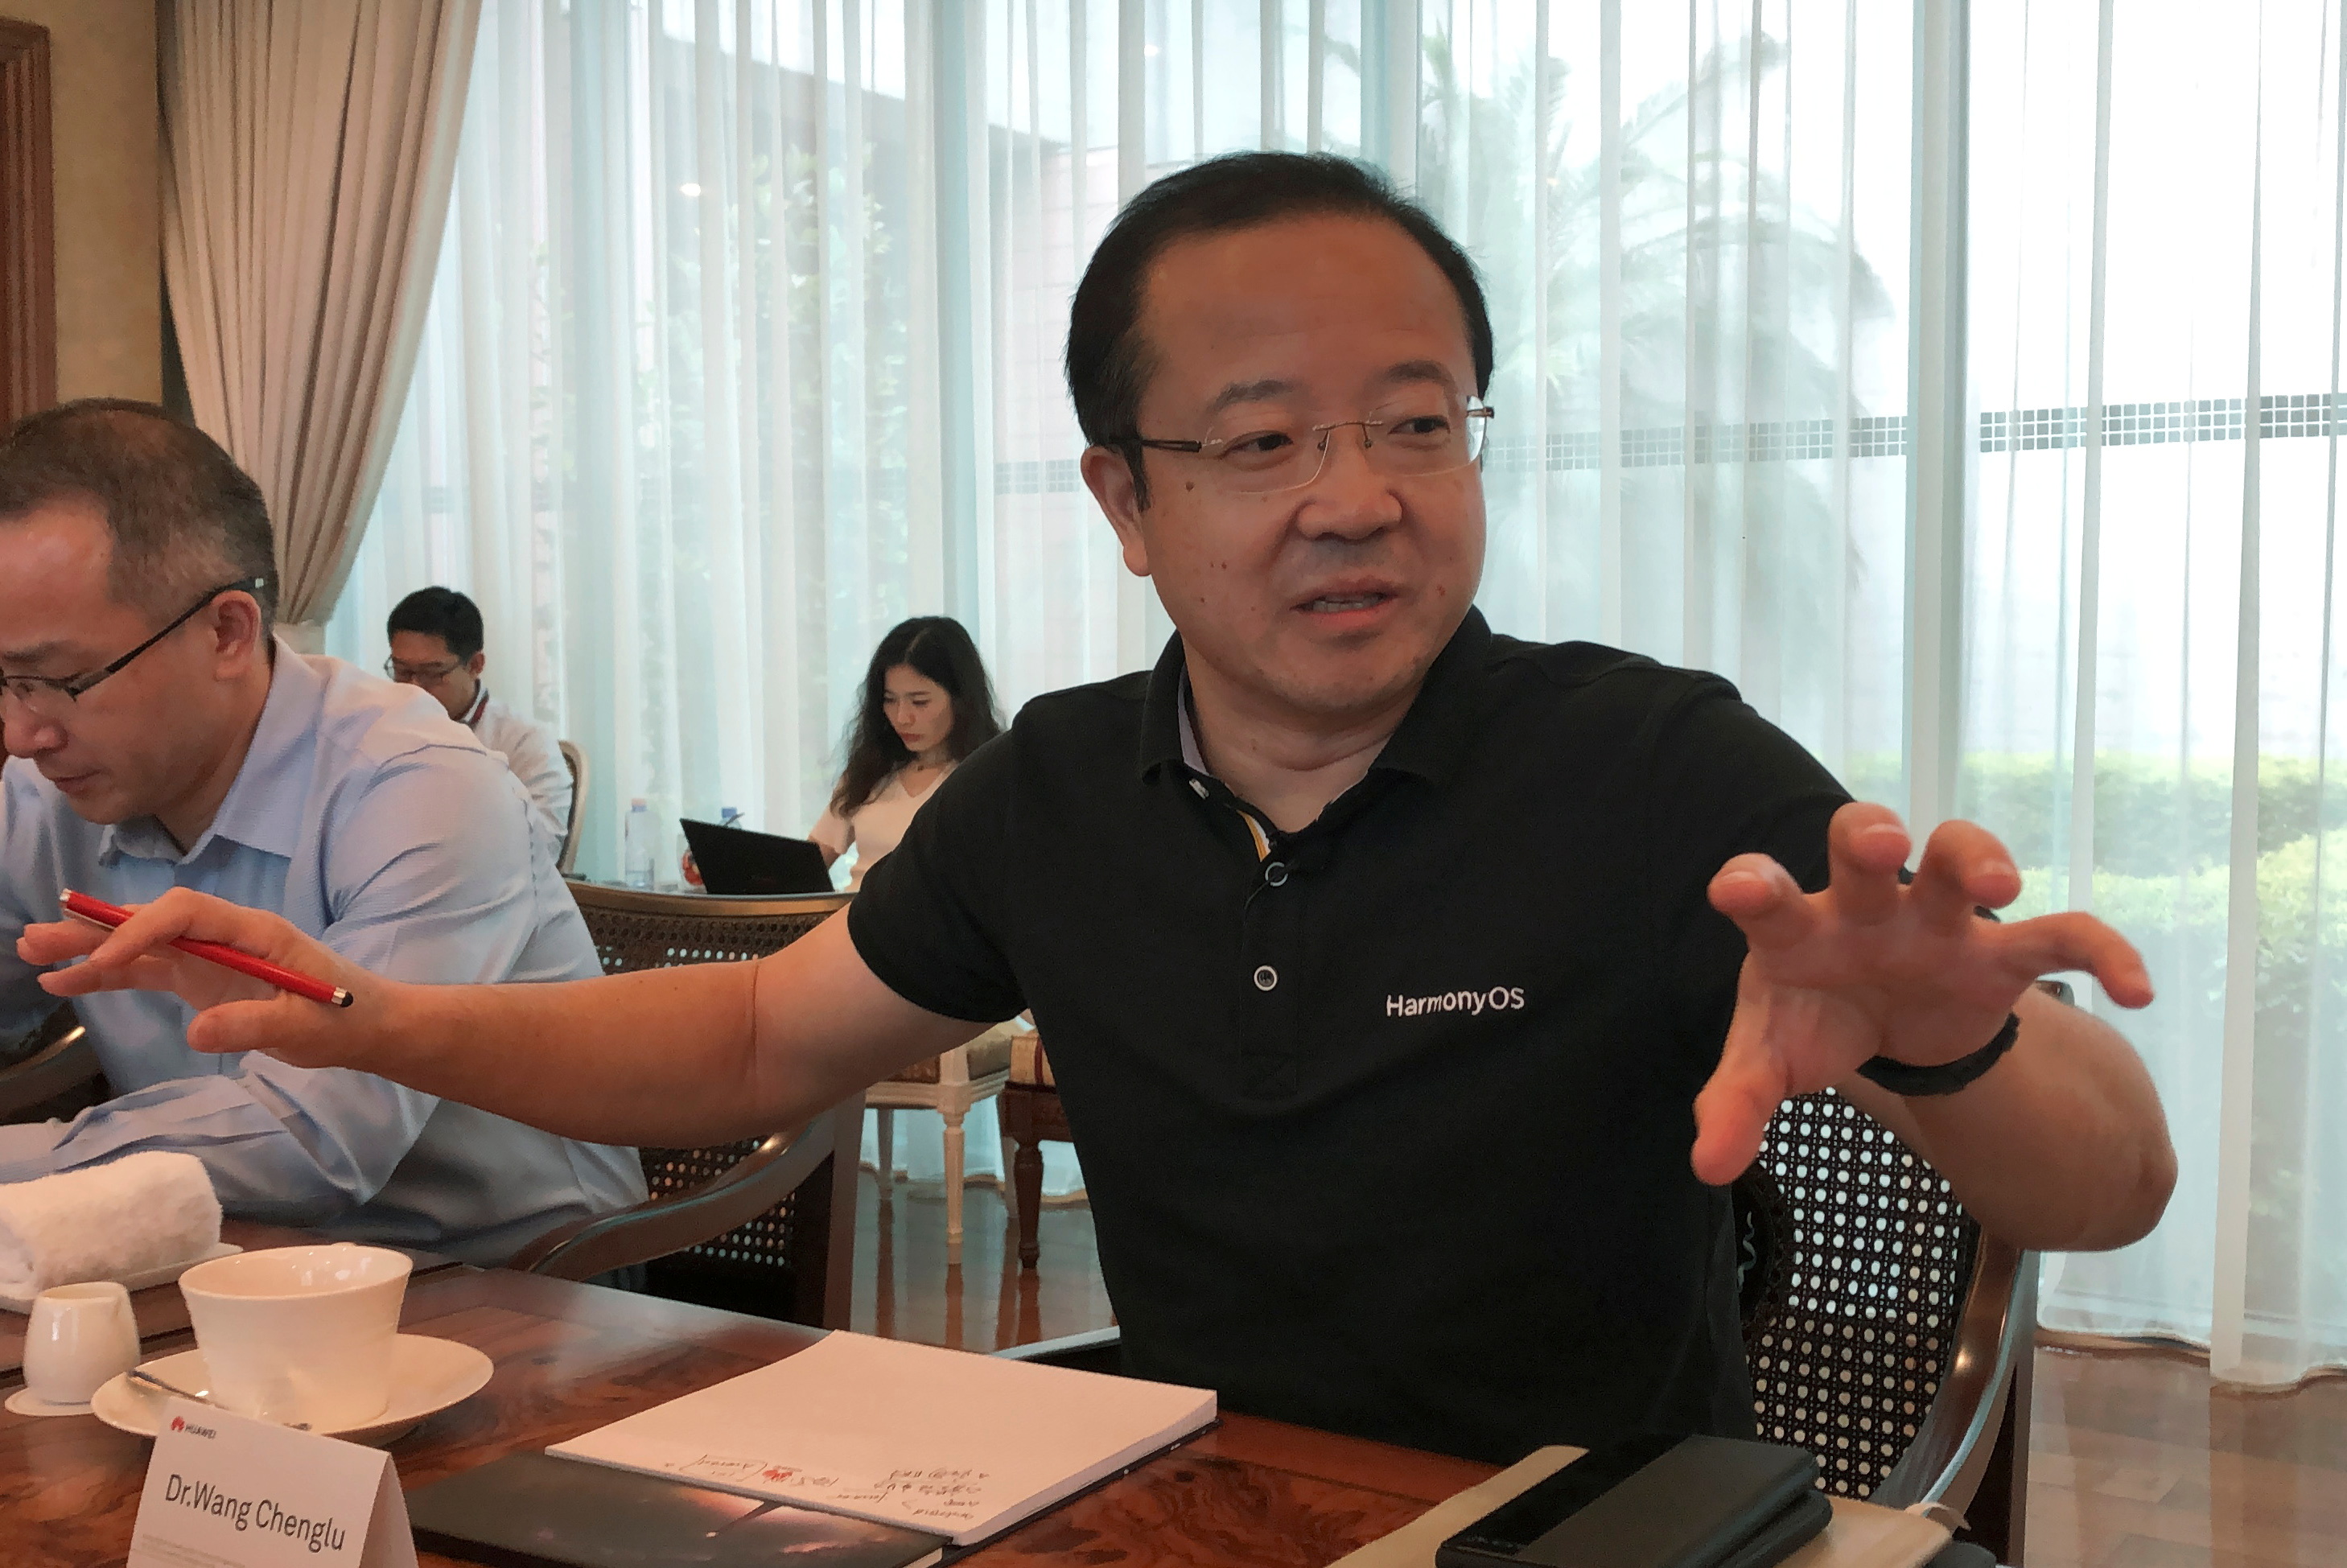 Wang Chenglu, president of Huawei Consumer Business Group's Software Department, talks about the HarmonyOS operating system during a media roundtable at the Huawei headquarters in Shenzhen, Guangdong province, China June 1, 2021. Picture taken June 1, 2021. REUTERS/David Kirton